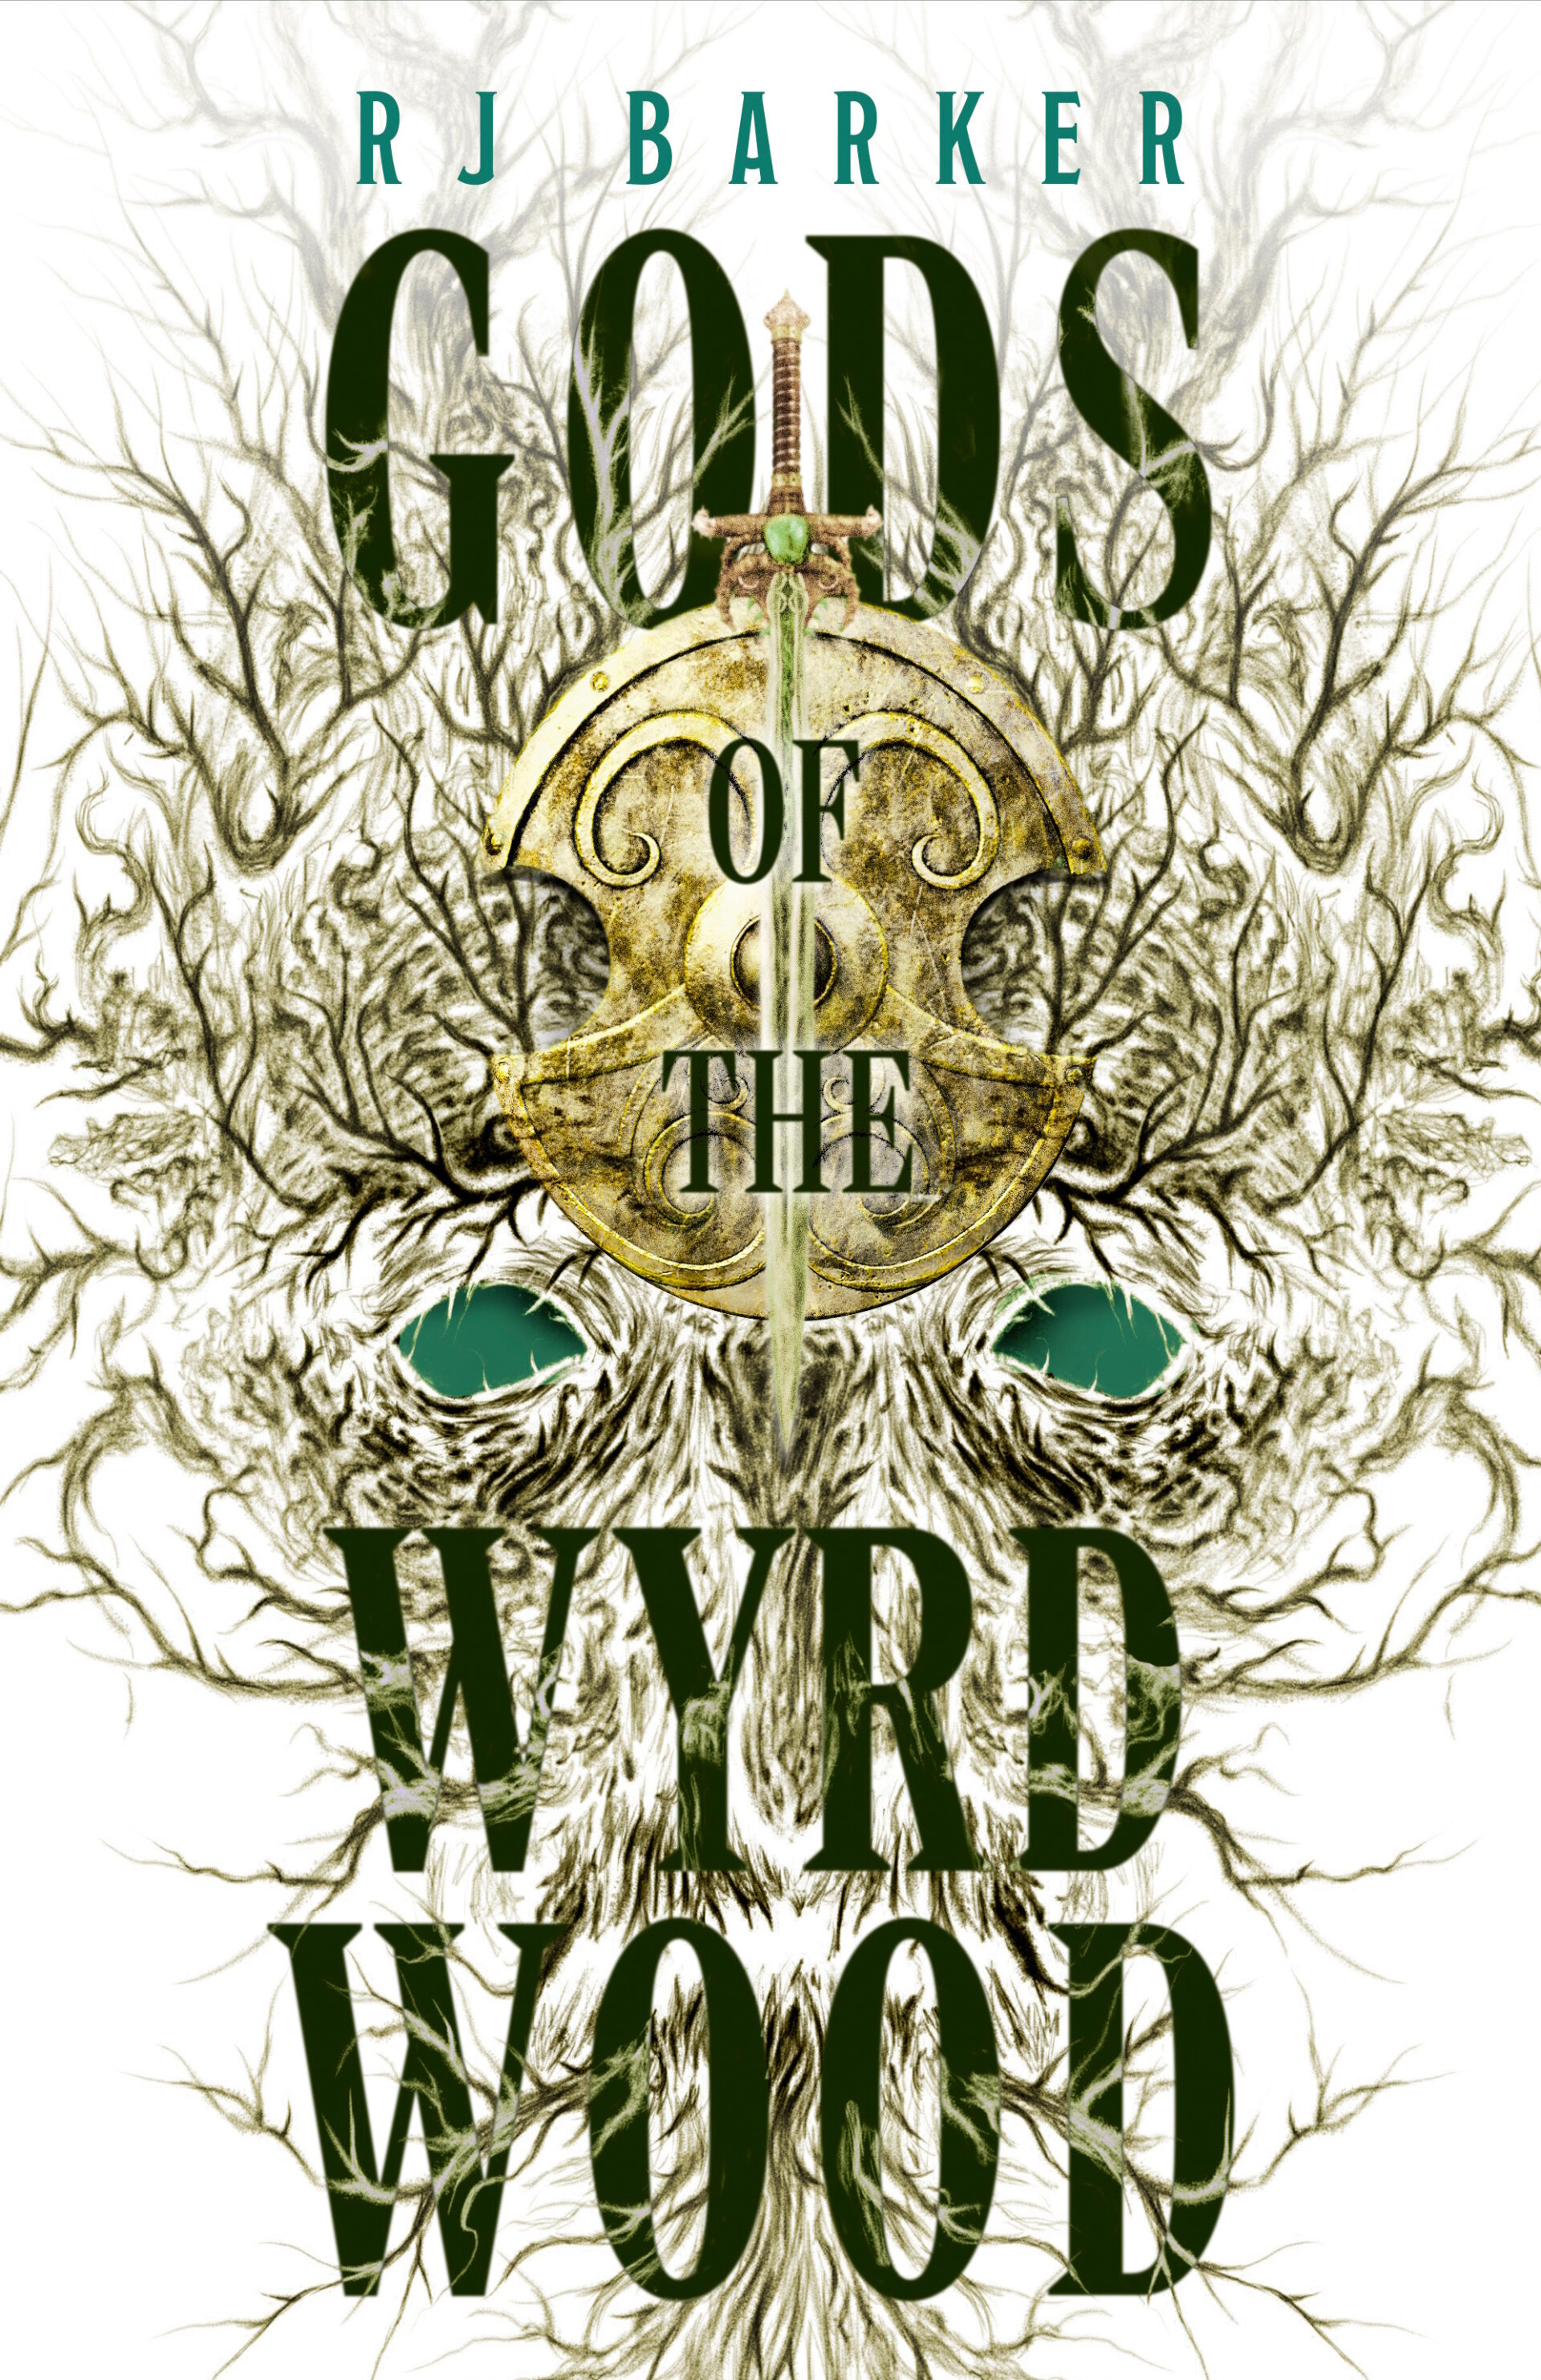 The cover for RJ Barker's fantasy novel GODS OF THE WYRDWOOD shows the author name and title, as well as a woodland pattern, with a rusted sword and shield on top of a knarled and creepy tree design. Eyes lit with green glowing magic peer out from the tree.